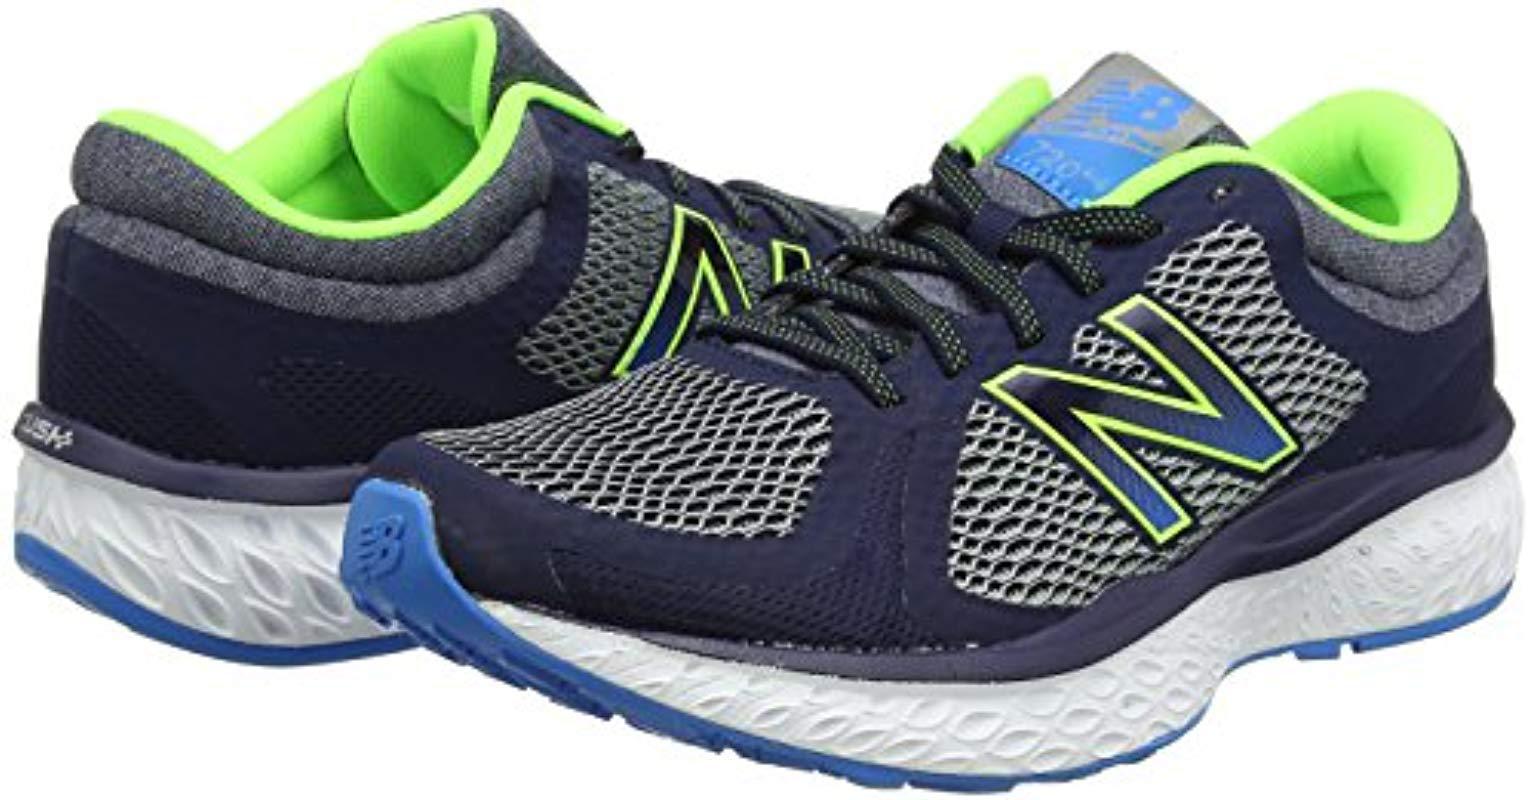 Purchase > men's new balance 720v4, Up to 76% OFF